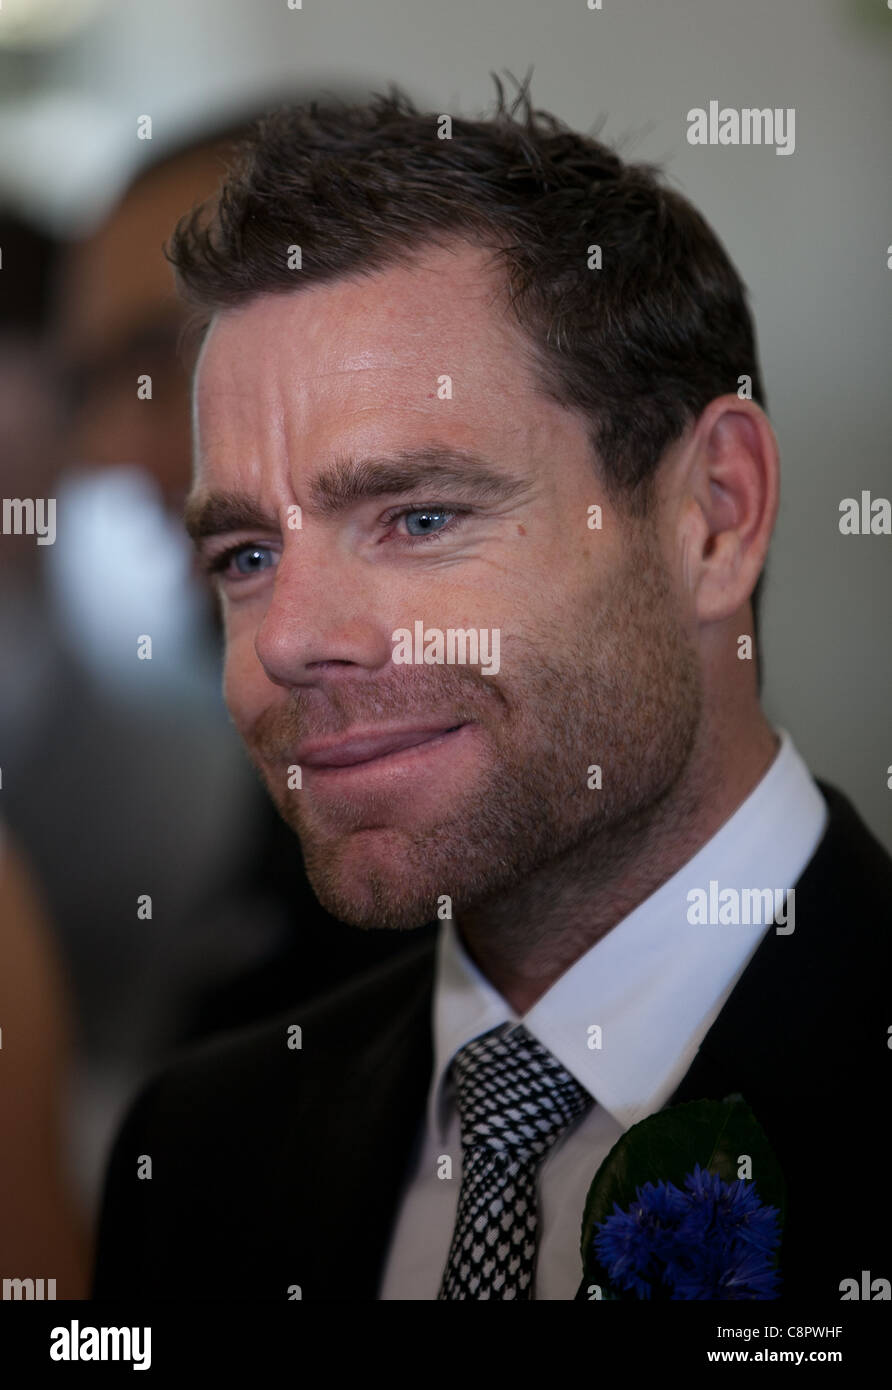 Cadel Evans at the Melbourne Cup, November 2011. Stock Photo